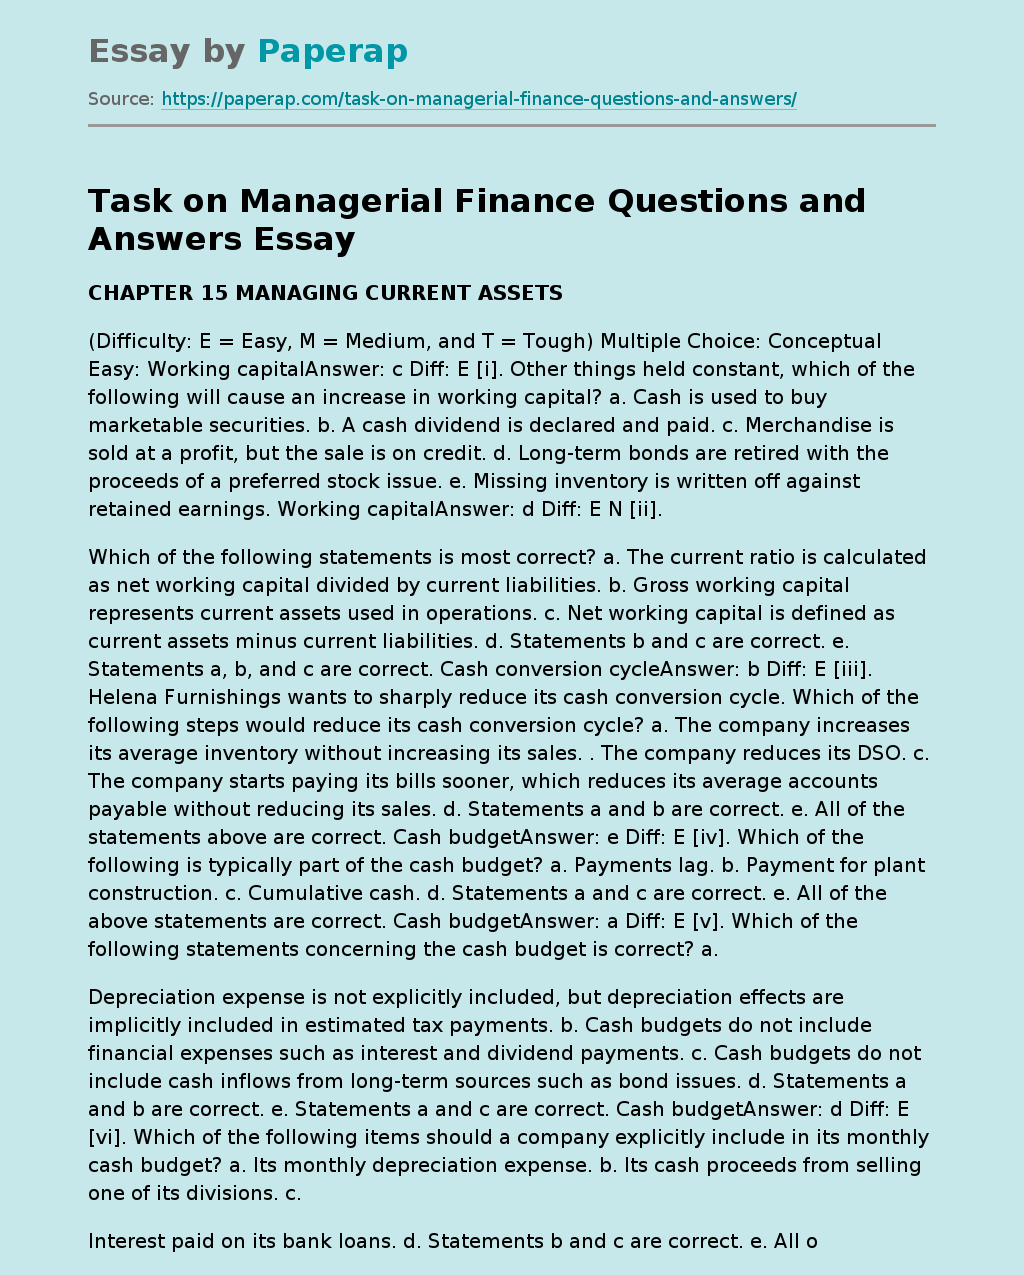 Task on Managerial Finance Questions and Answers